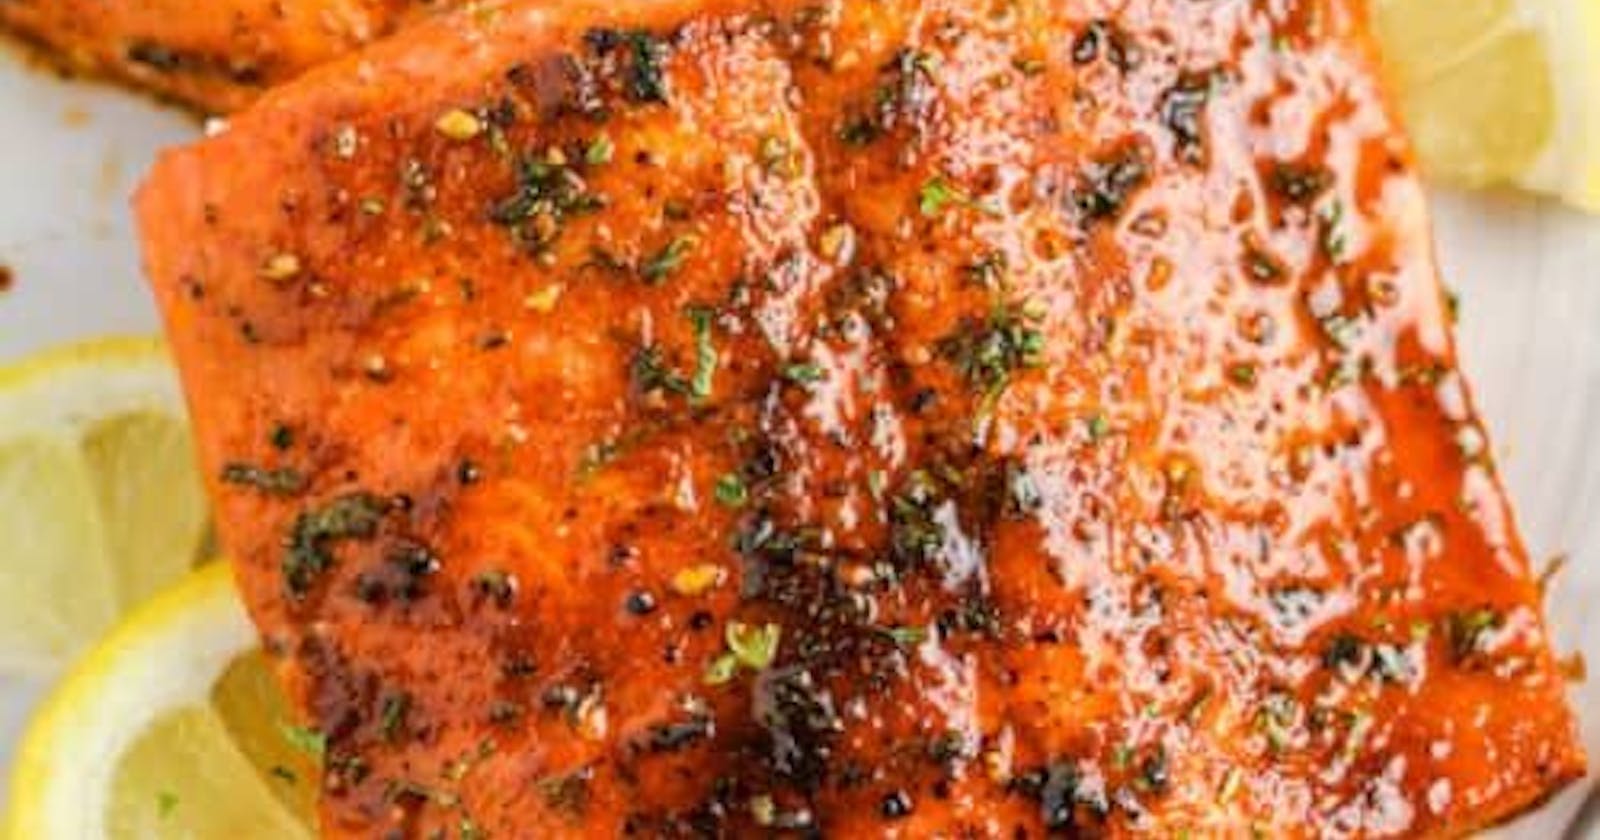 How Long to Cook a Salmon Fillet in an Air Fryer